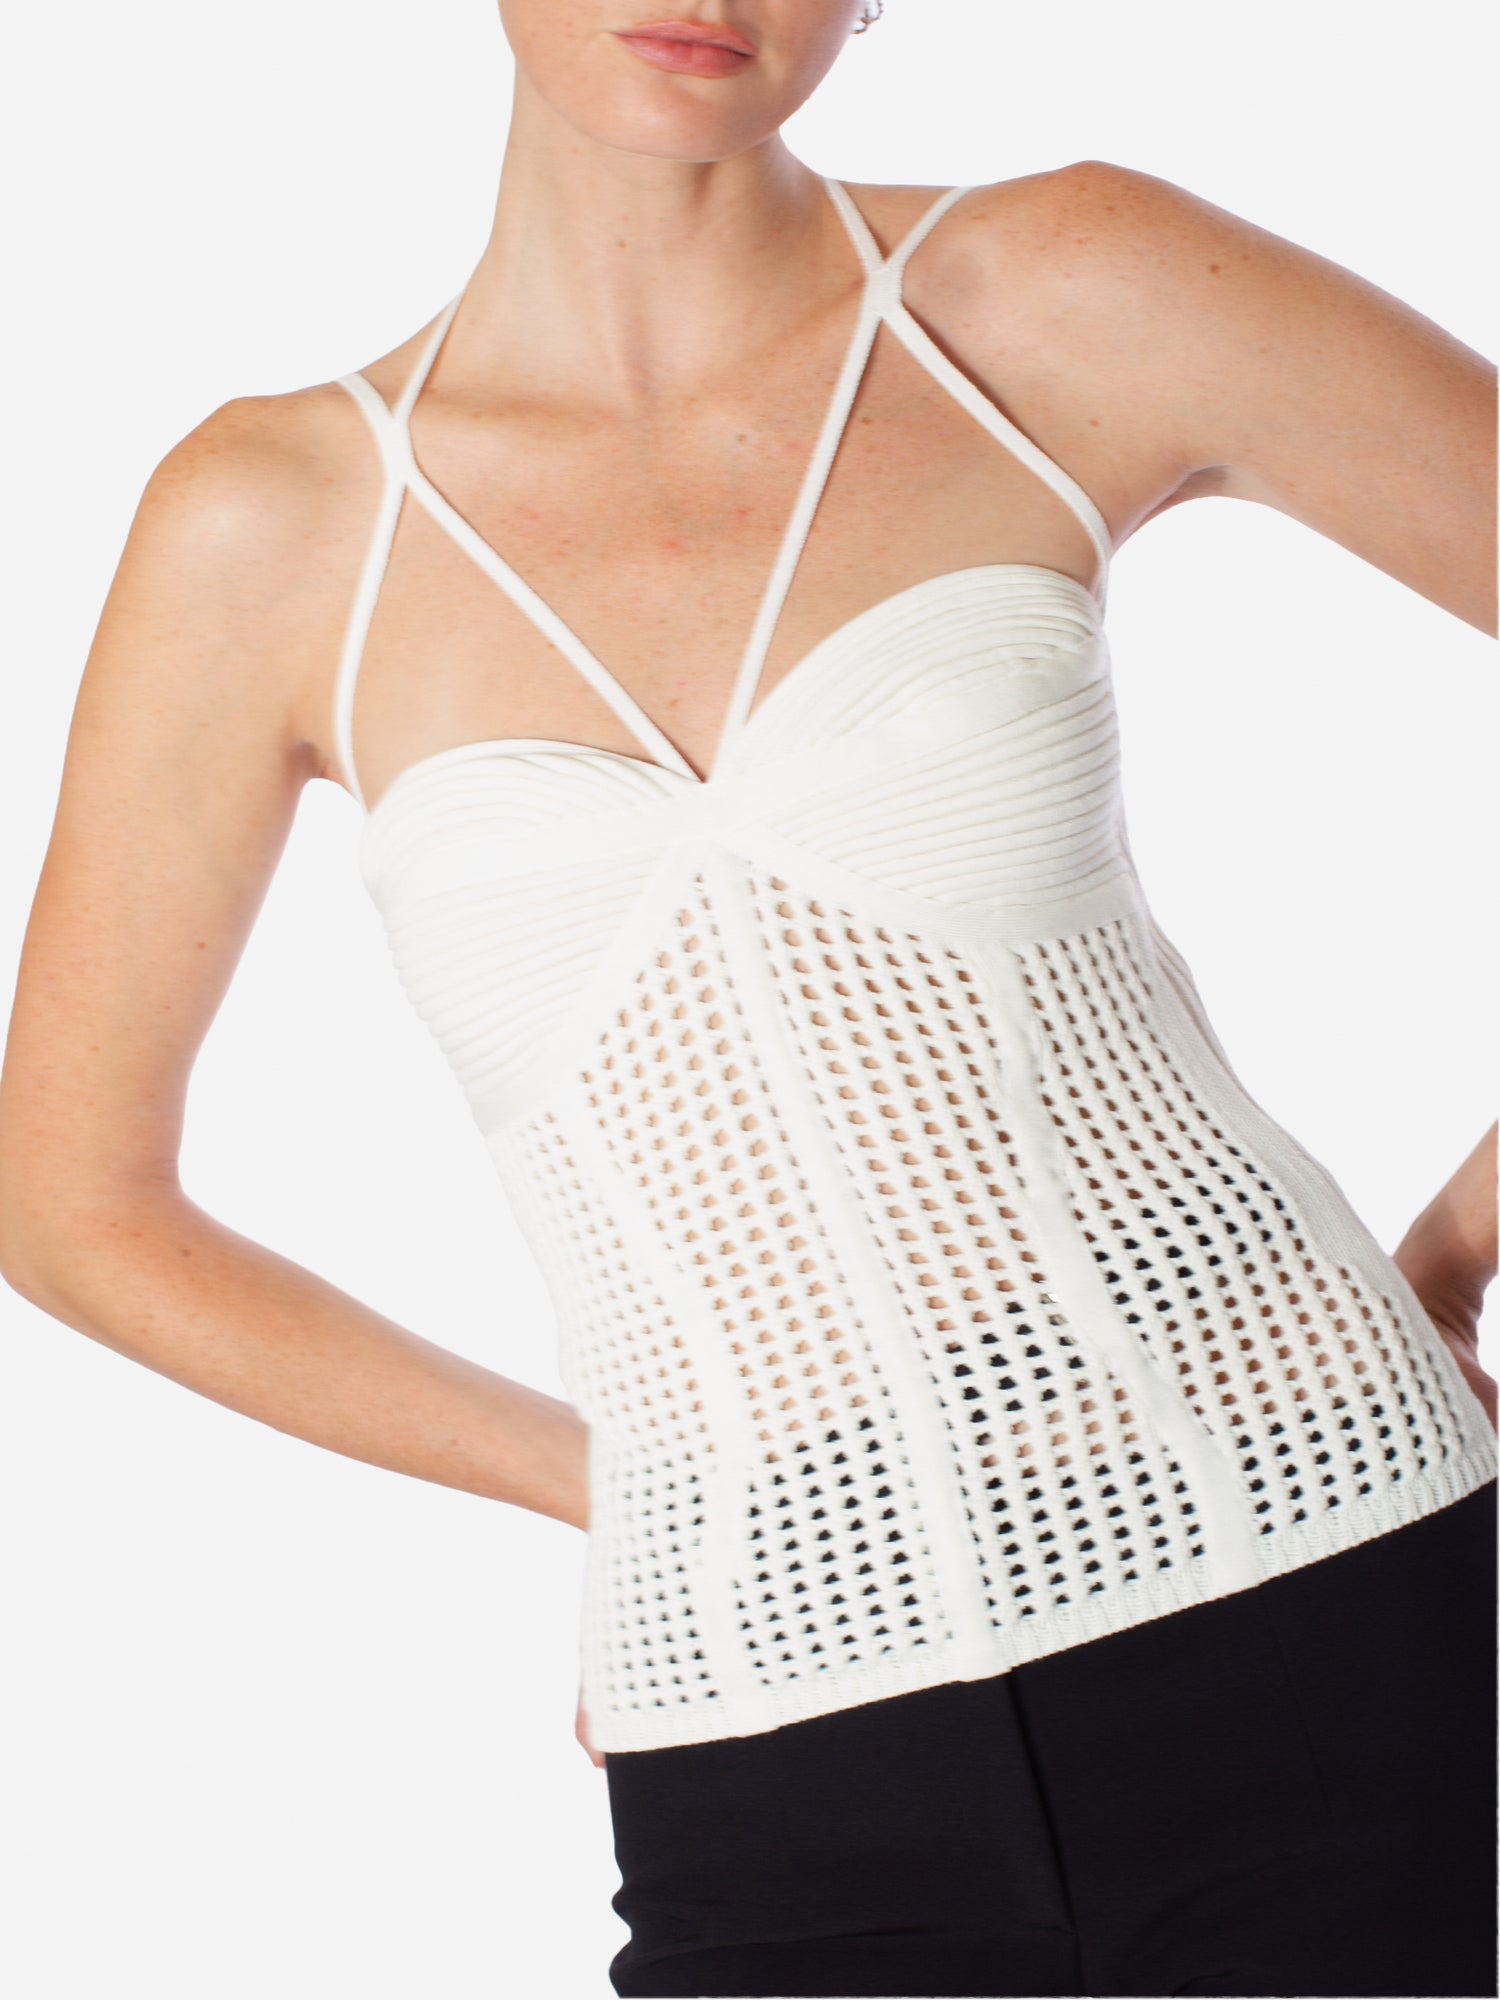 ANDREADAMO Fishnet Knit Corset Top With Spiral Details